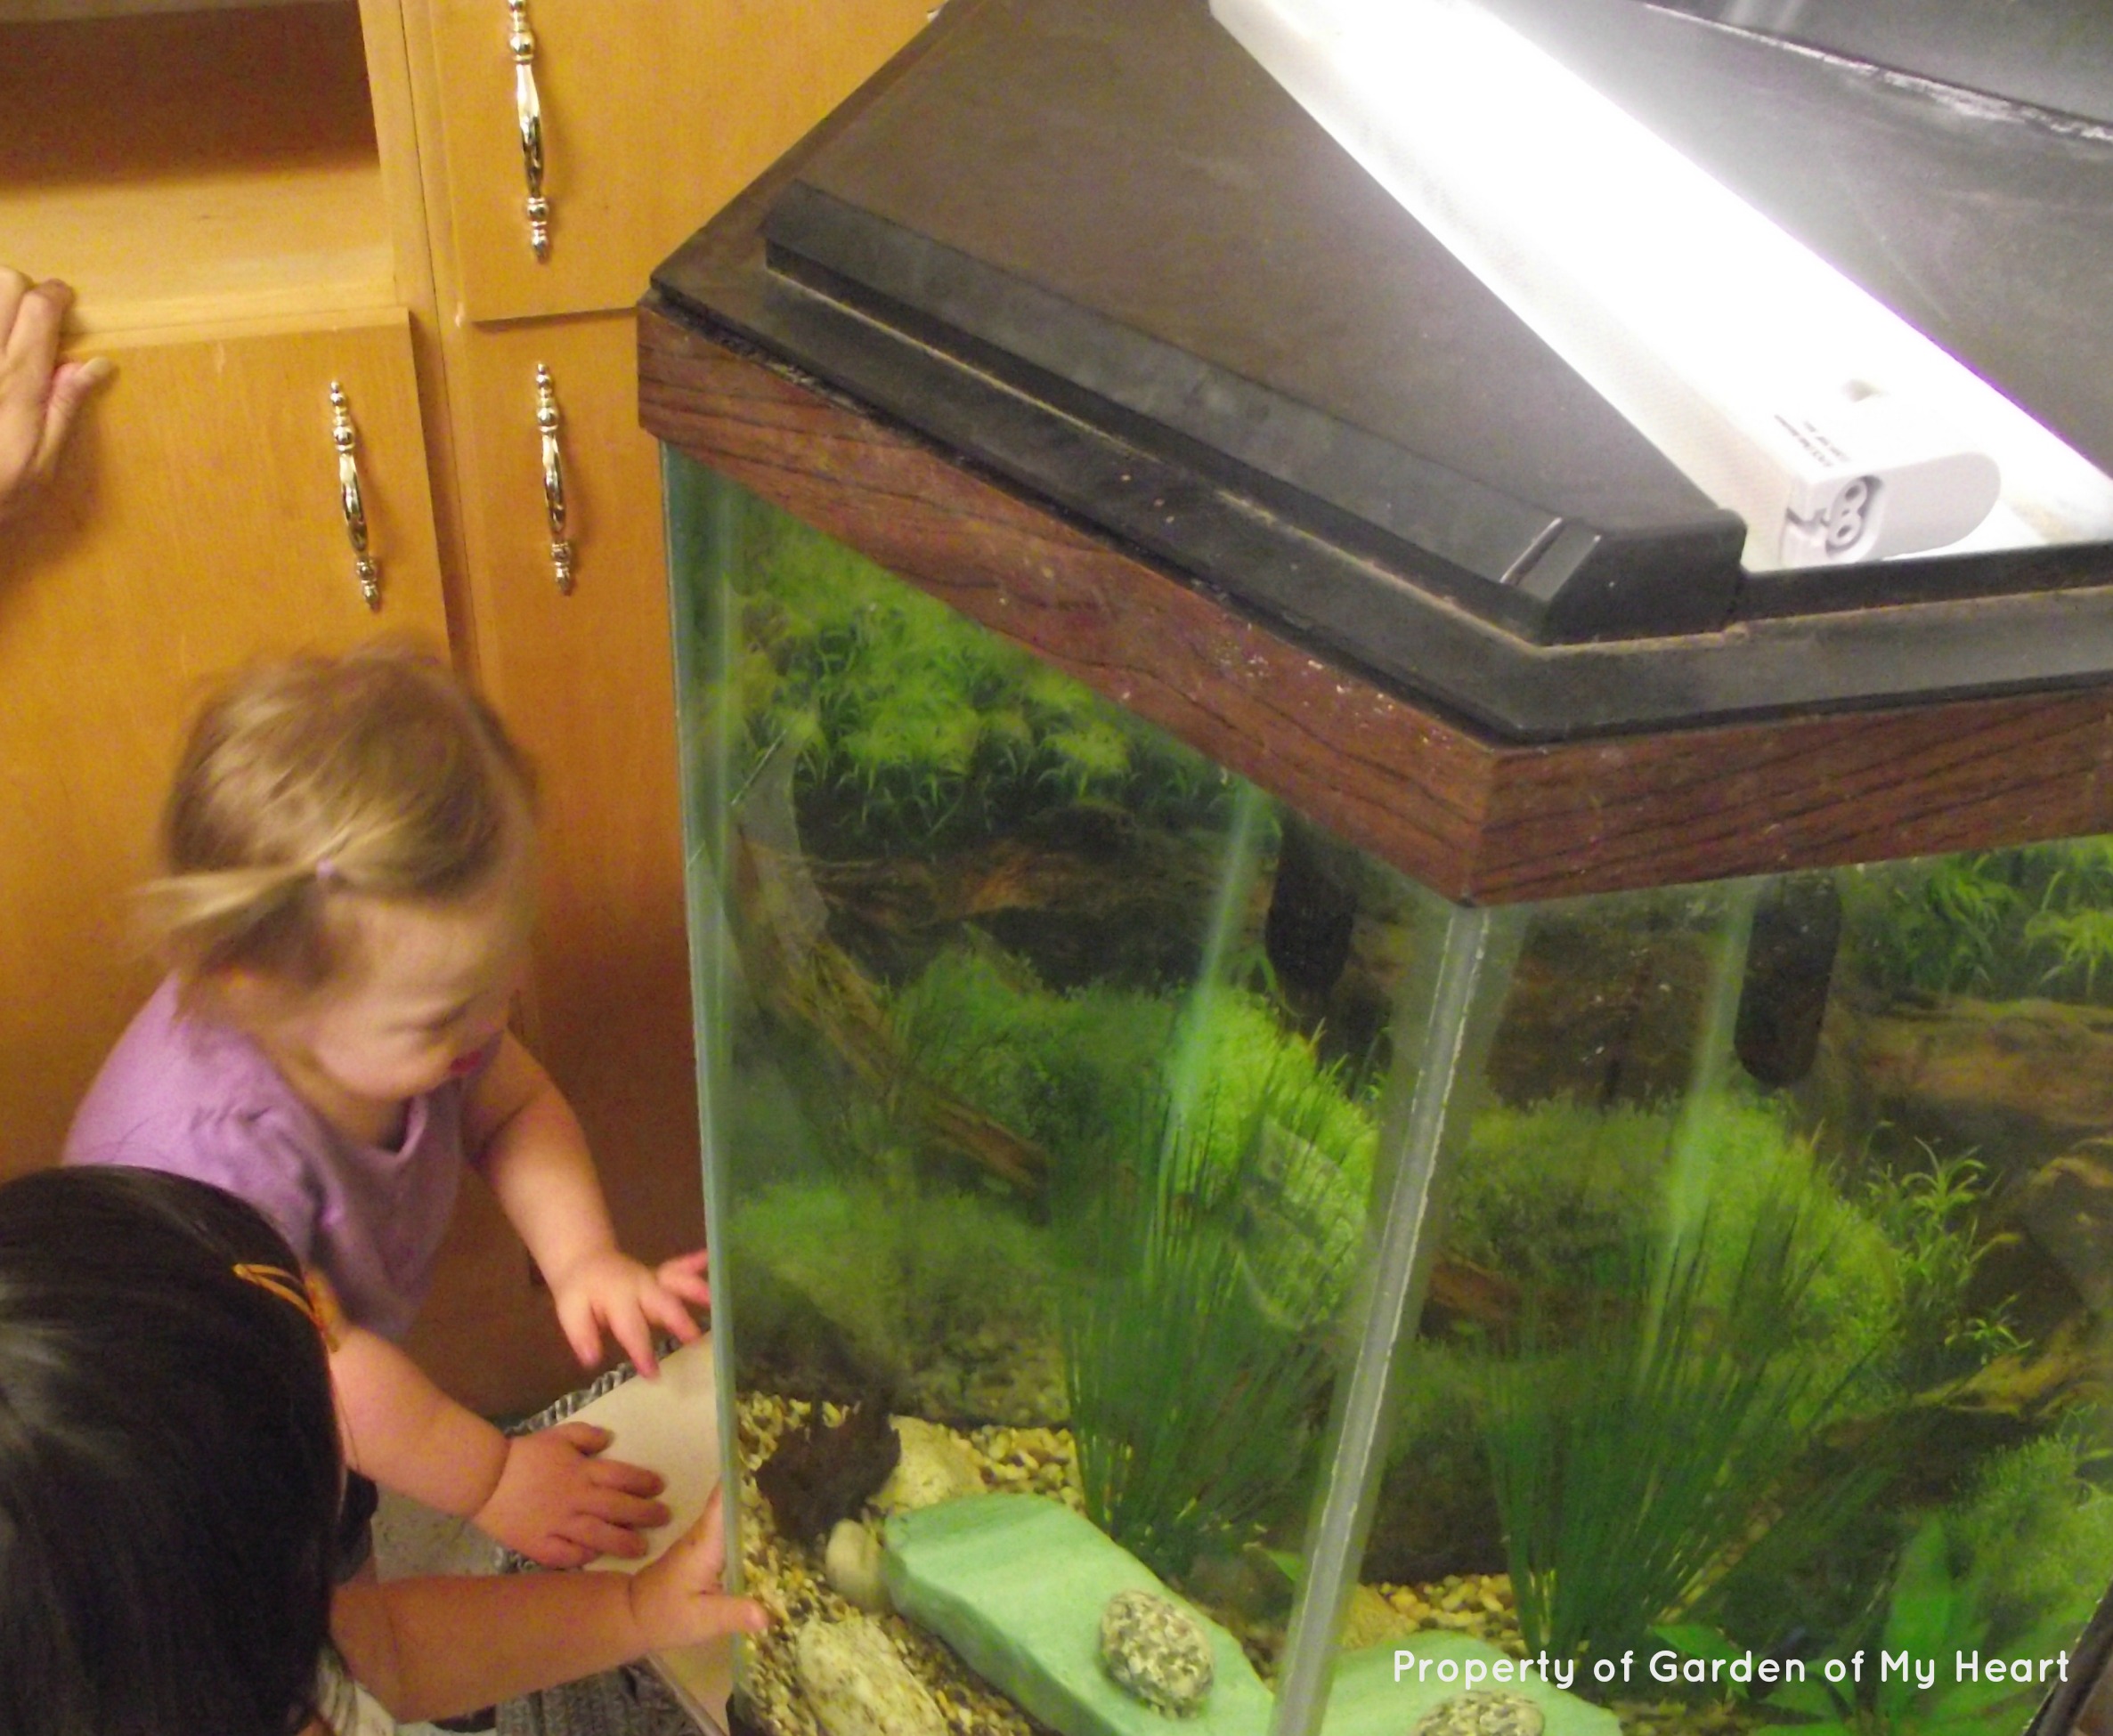 Rowenna exploring the fishtank with a friend.